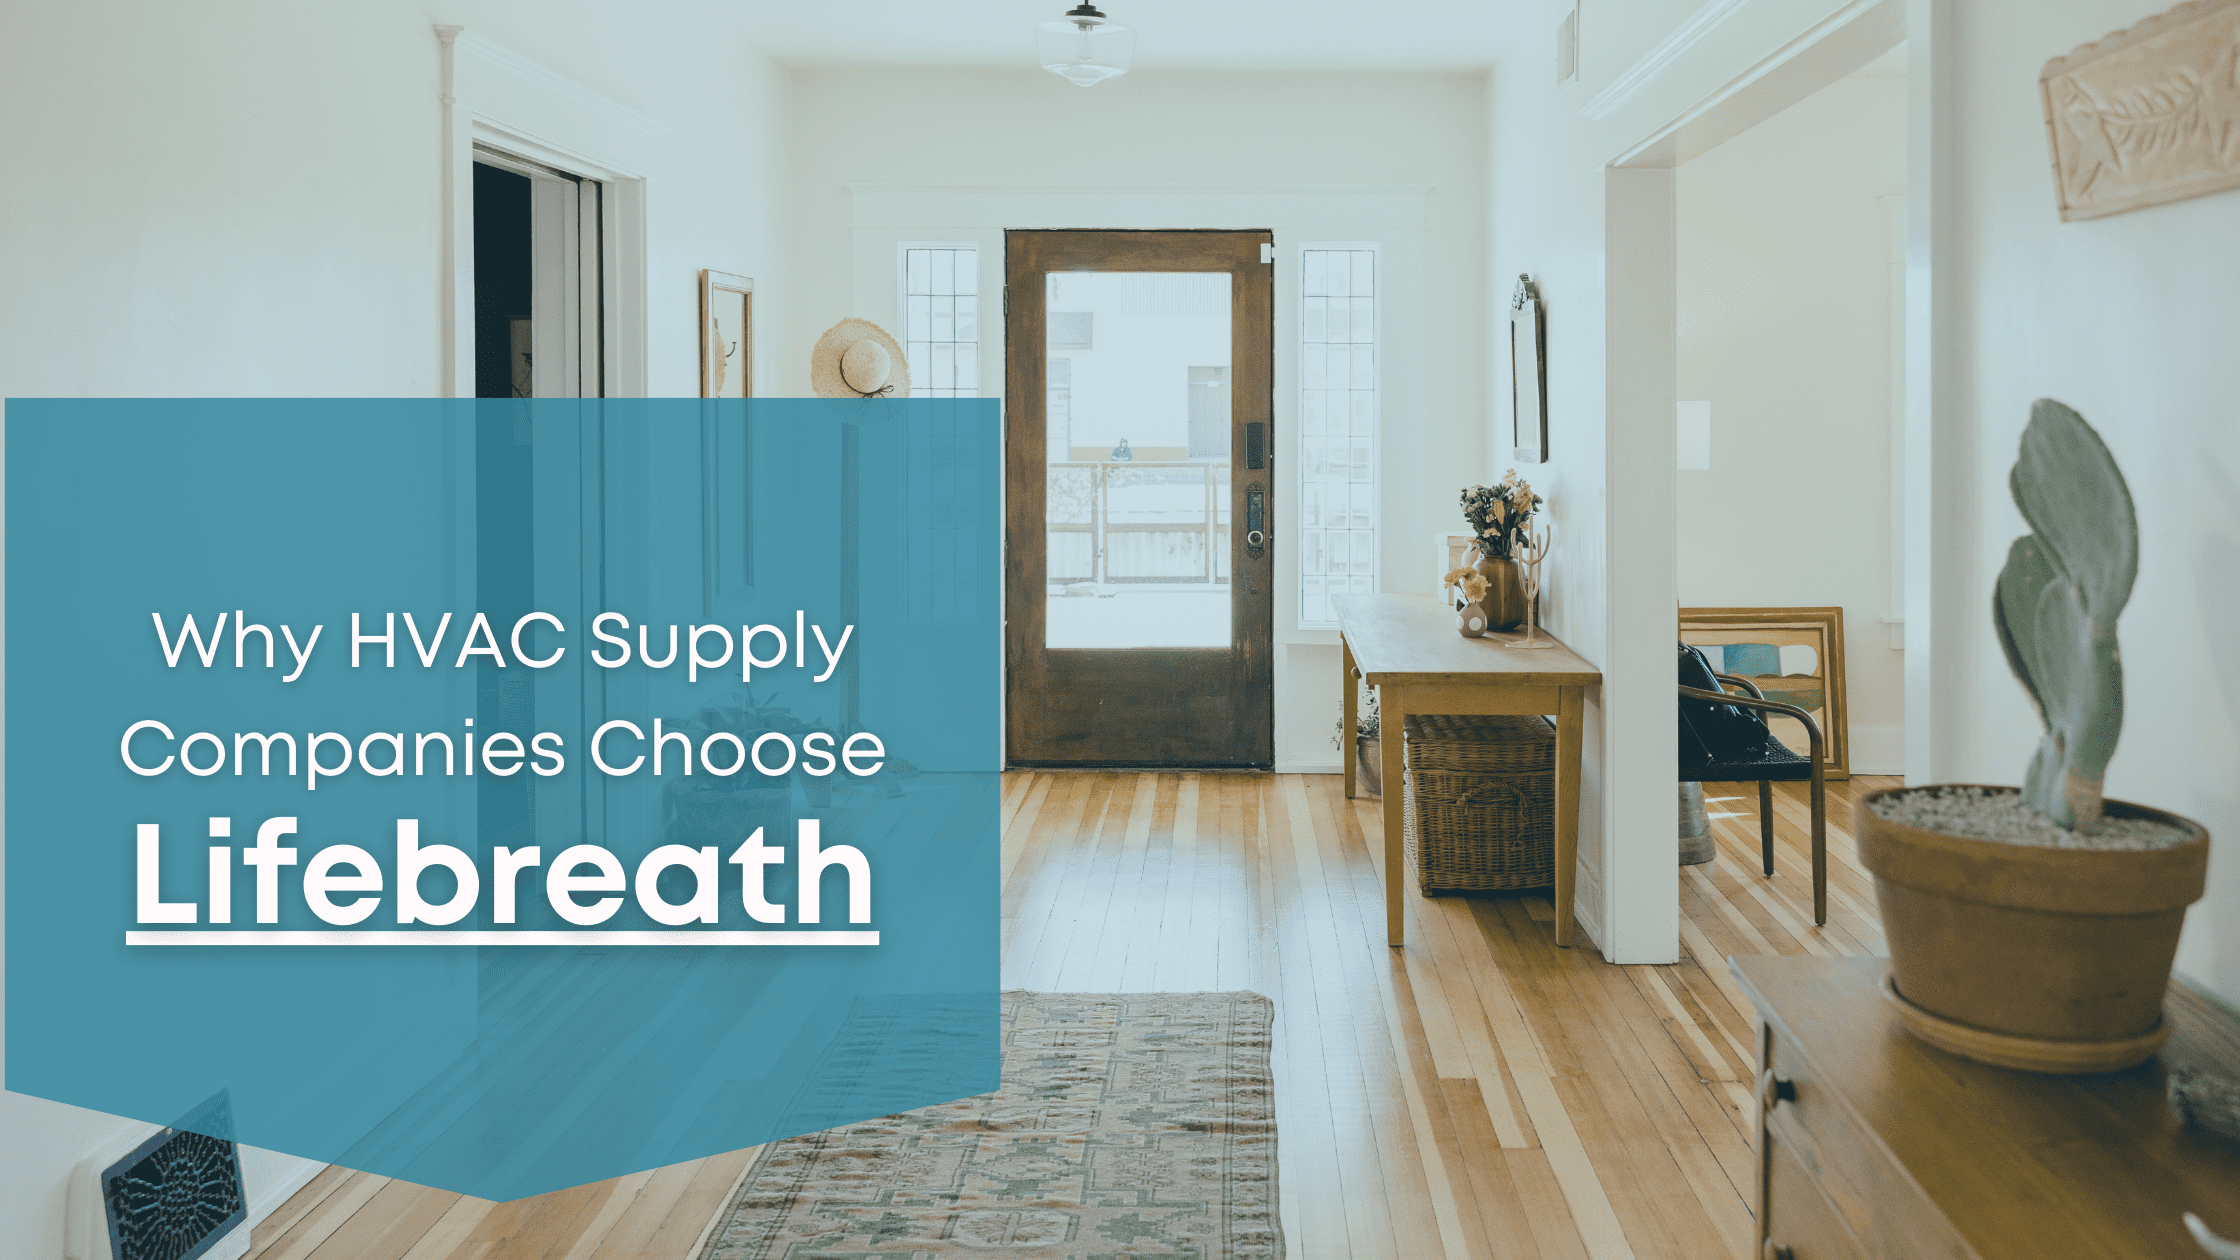 HVAC Supply Houses are Choosing Lifebreath for Fresh Air Solutions